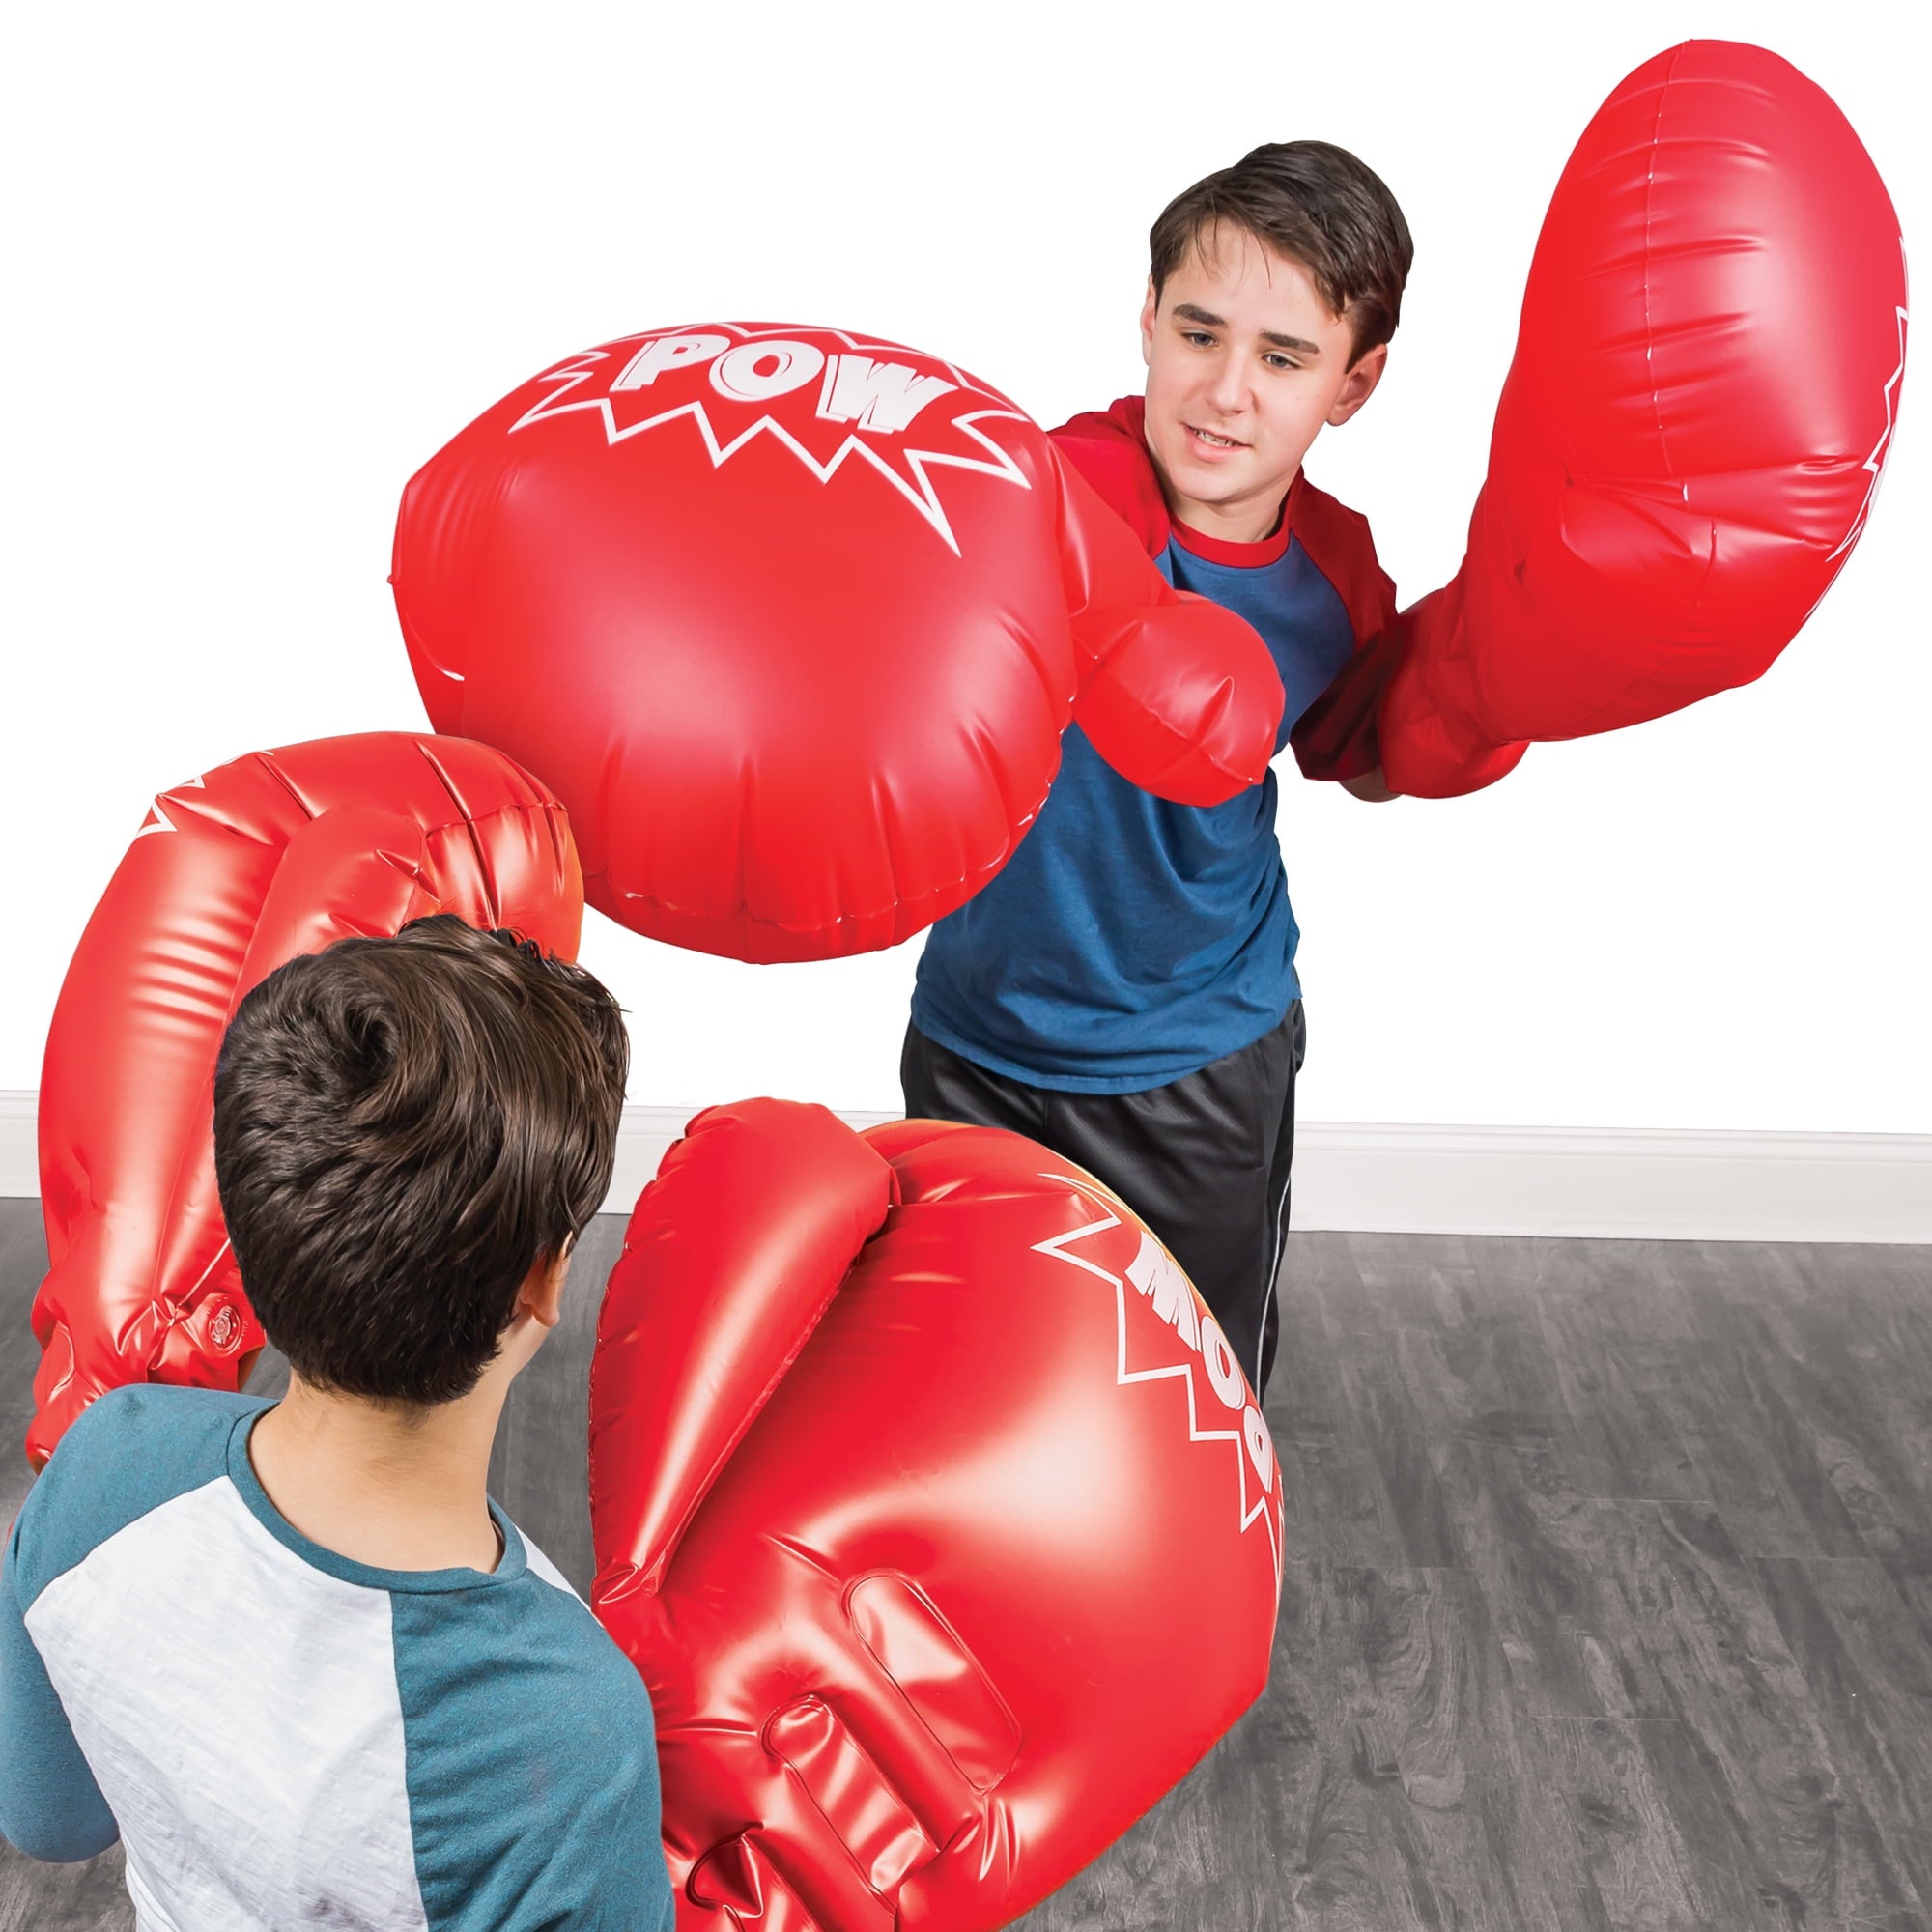 EastPoint Big Boppers Giant Inflatable Boxing Gloves, 1 Pair, 26 in. Red (1.5 lbs)